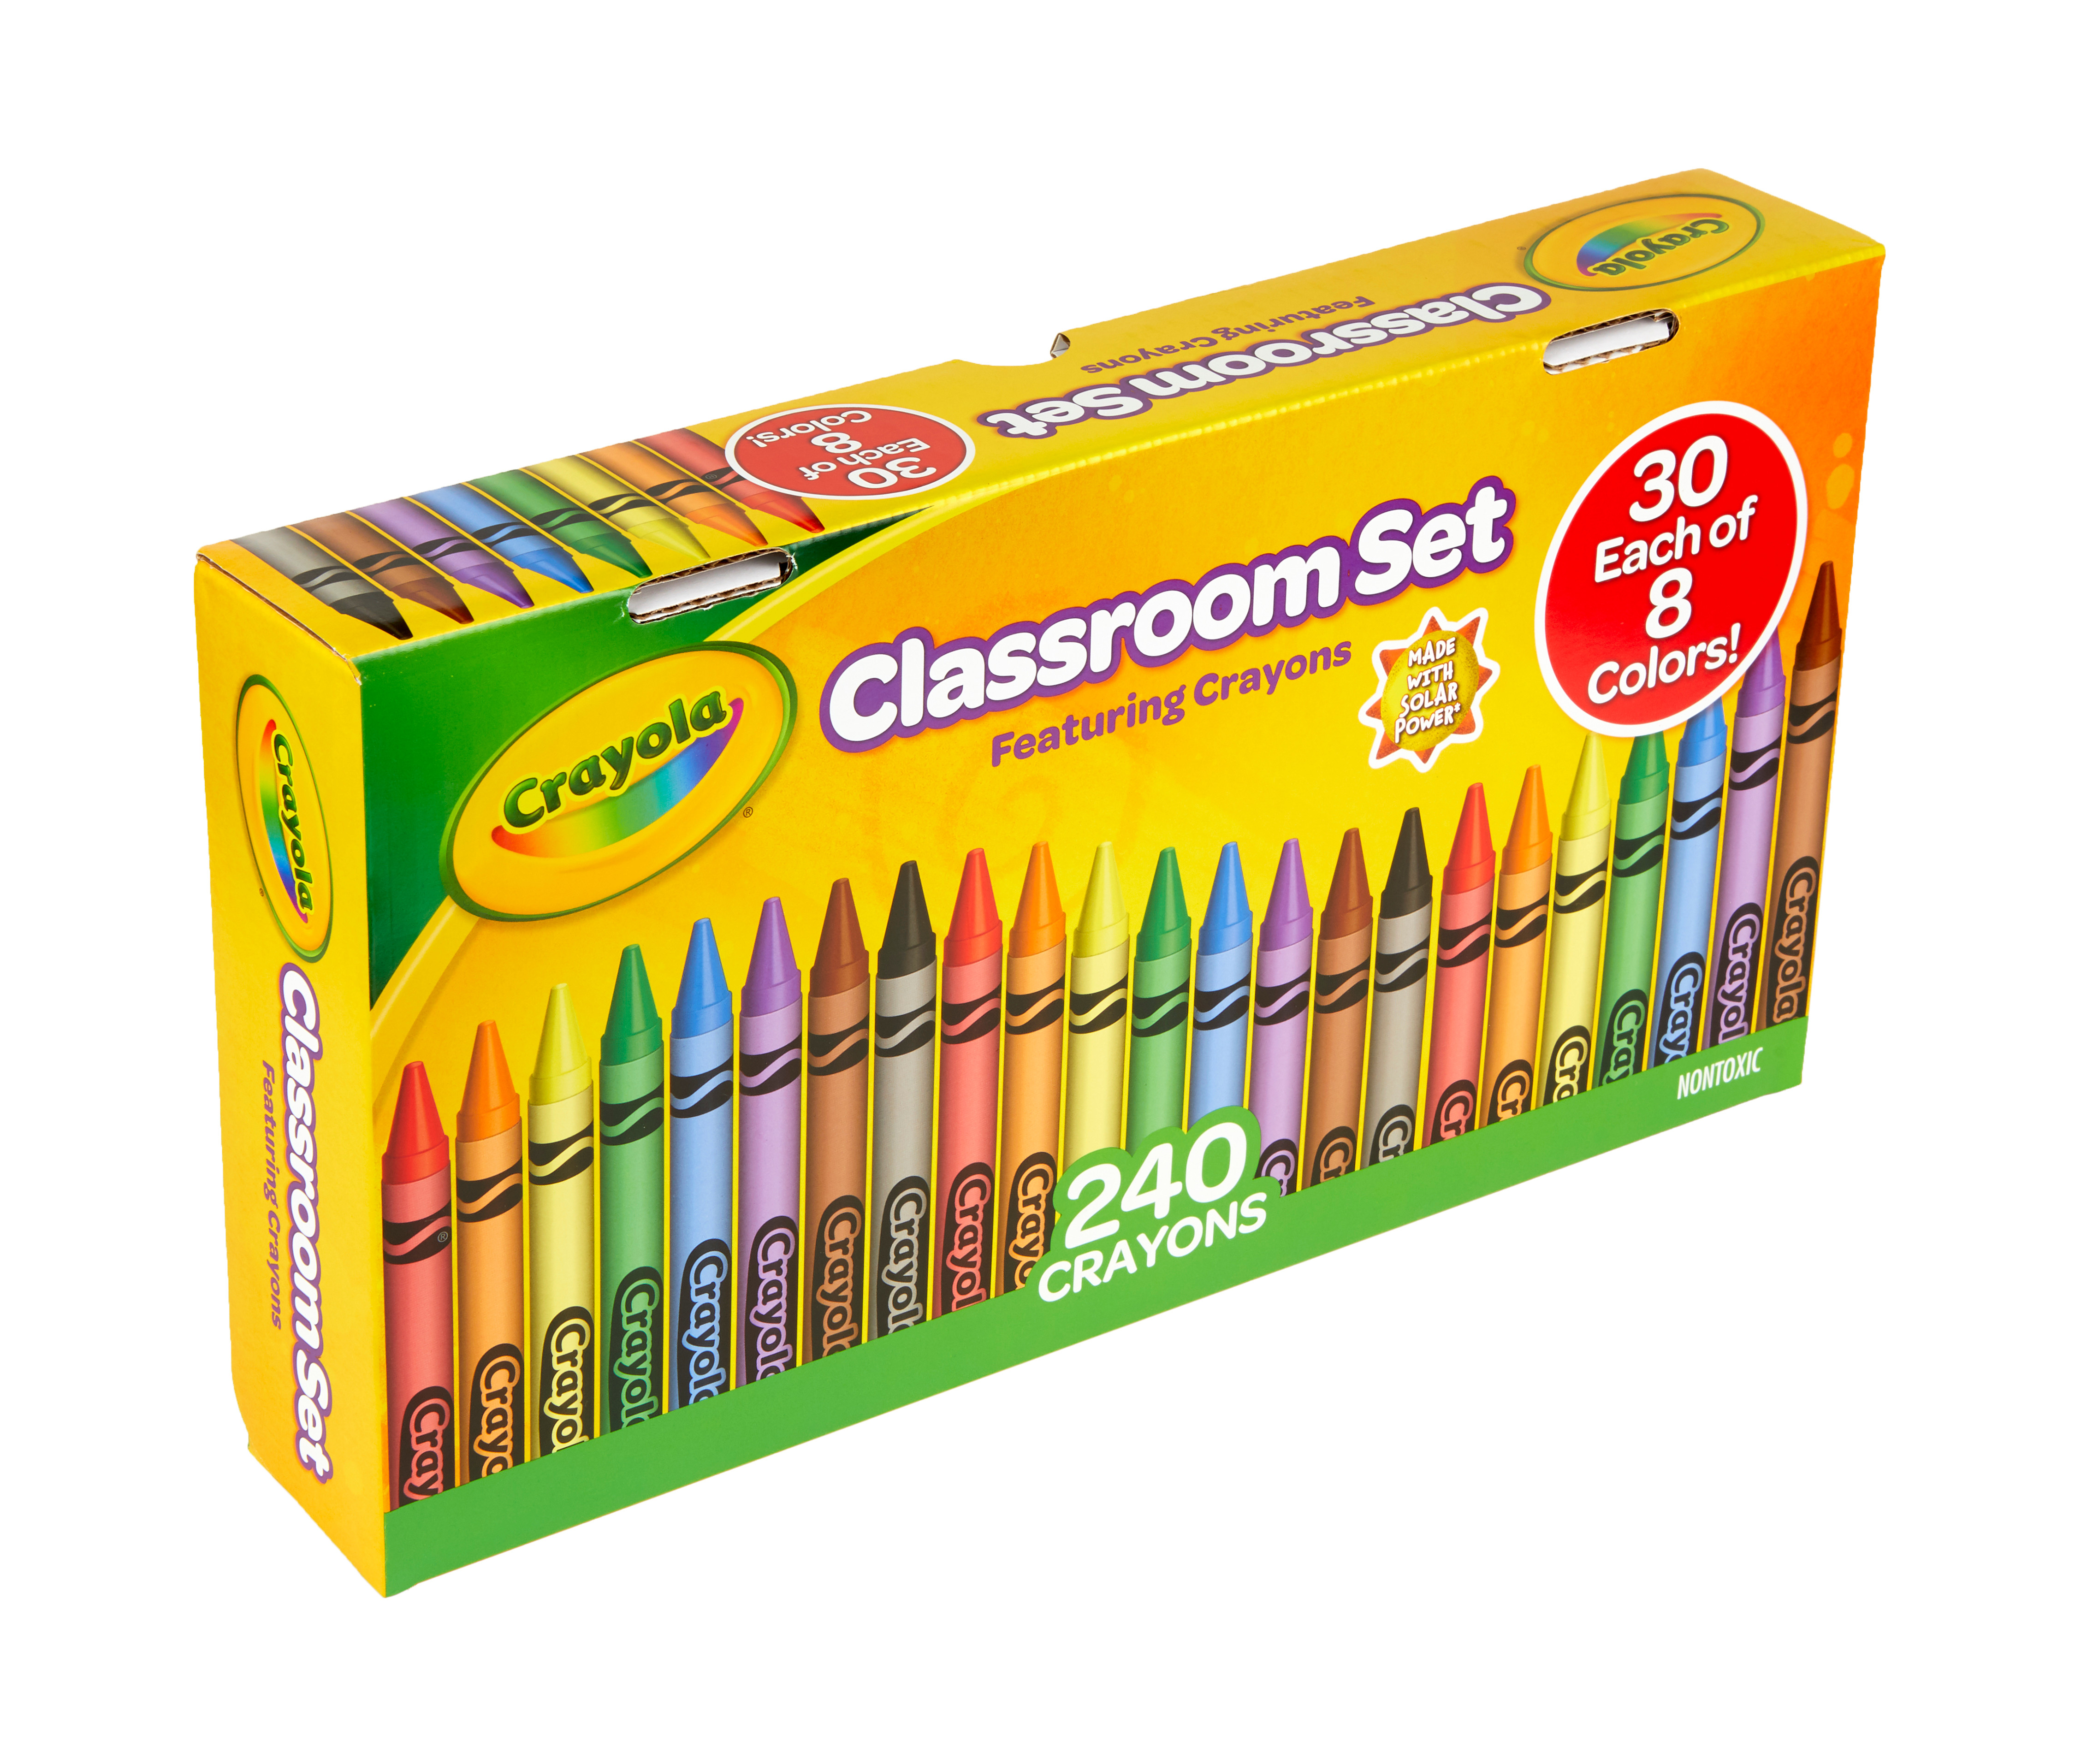 Crayola Classroom Set Crayons, 240 Ct, Teacher Supplies & Gifts, Classroom Supplies, Assorted Colors - image 5 of 9